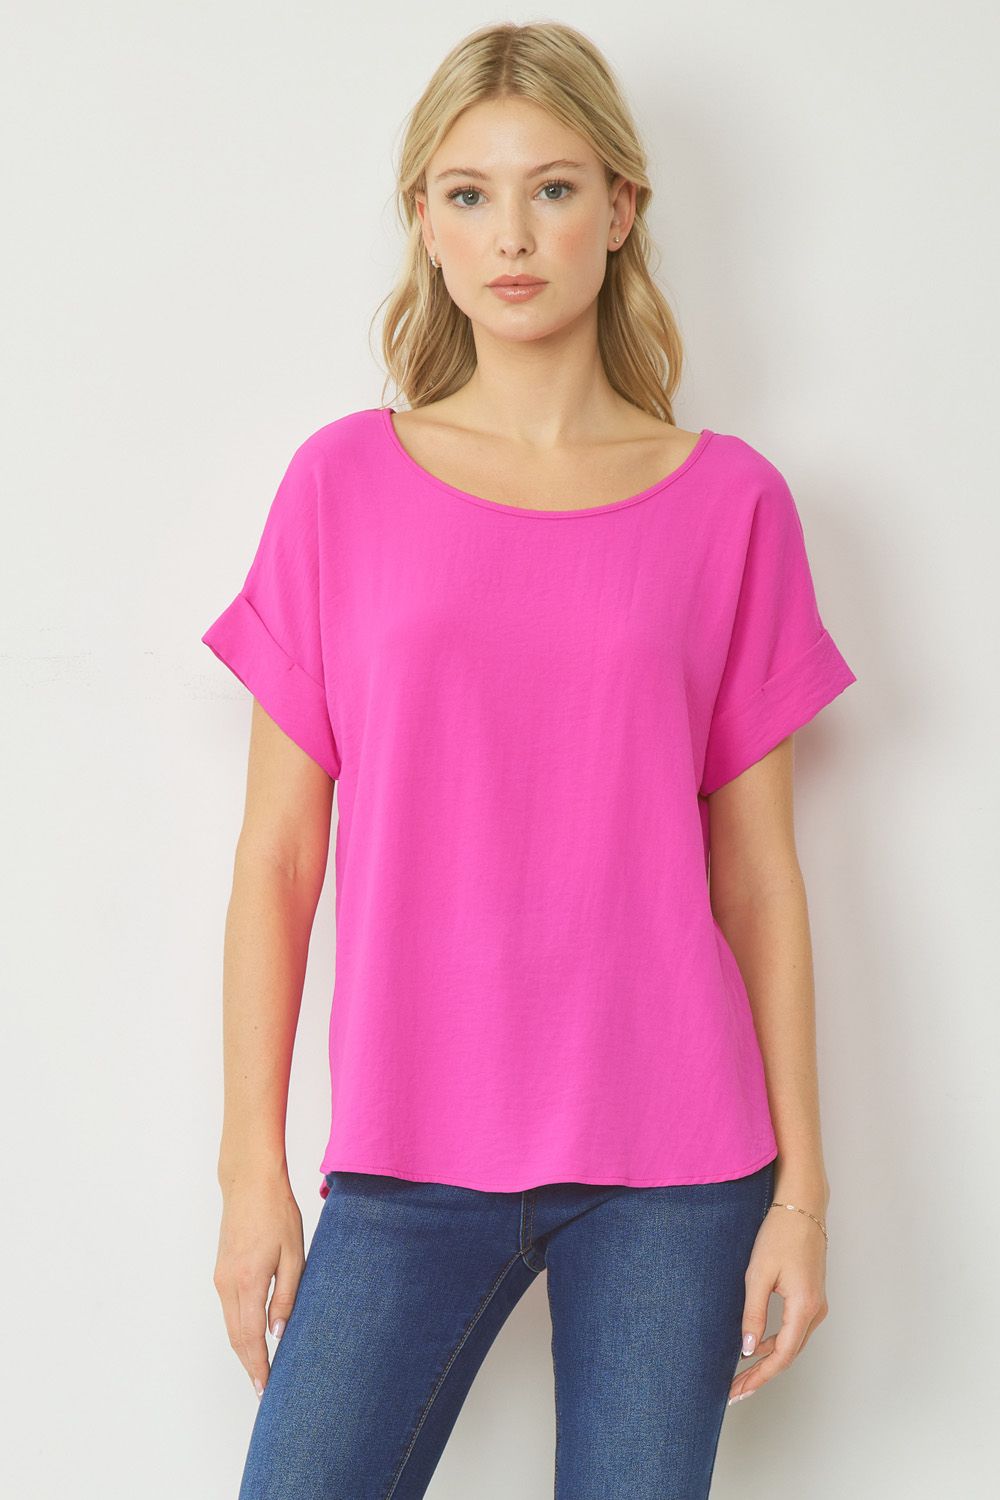 "My Everyday" Top (Hot Pink) - Happily Ever Aften